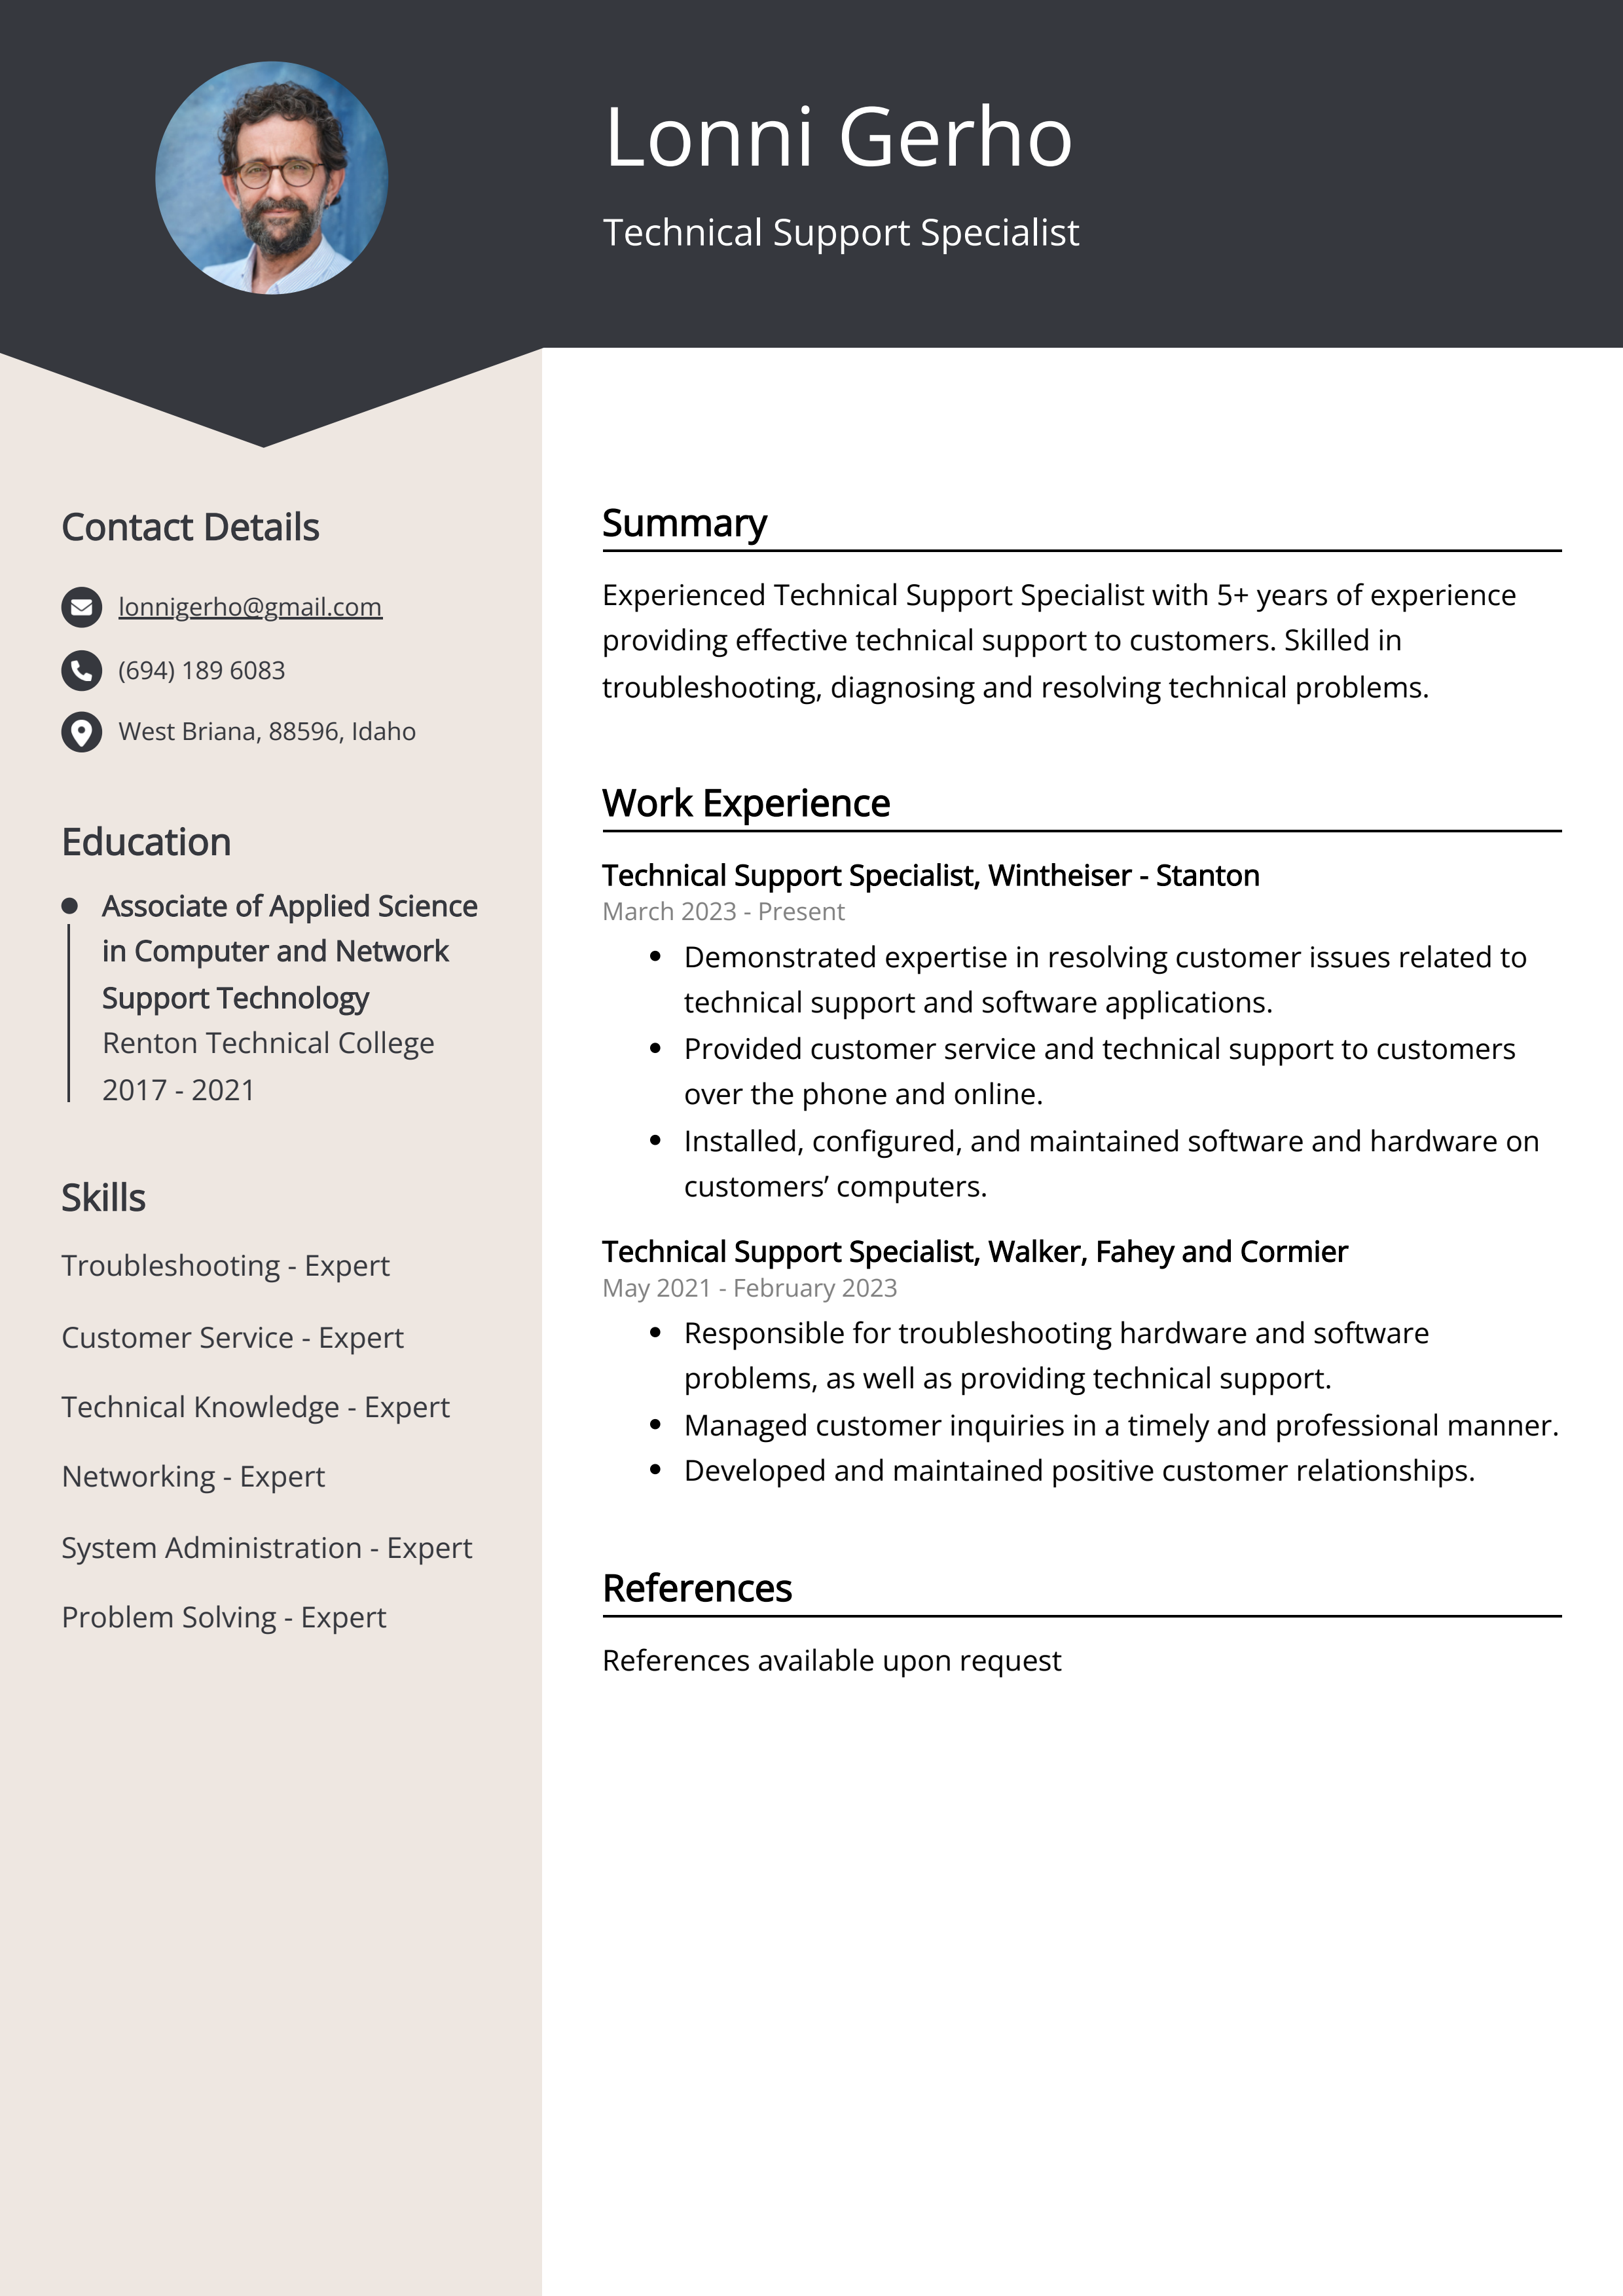 Technical Support Specialist CV Example